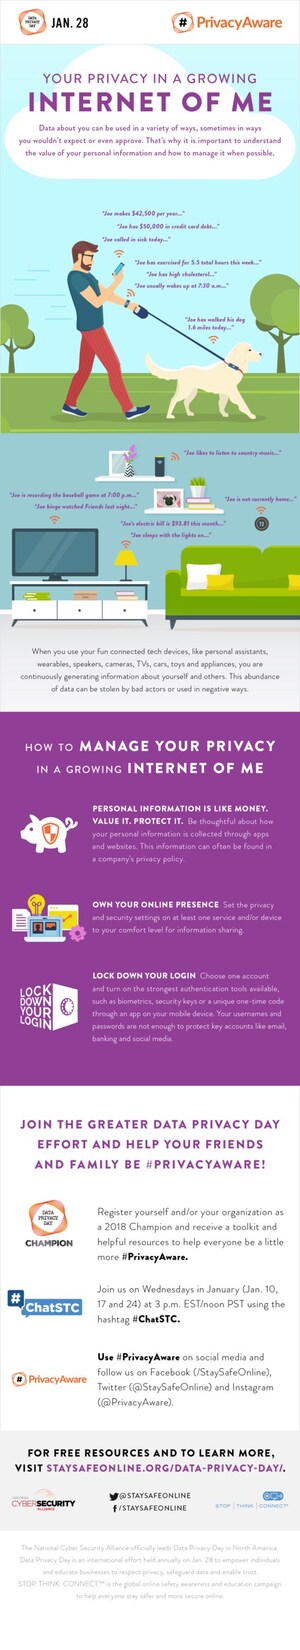 Data Privacy Day Reminds Everyone About the Value of Their Personal Information and How to Manage Online Privacy